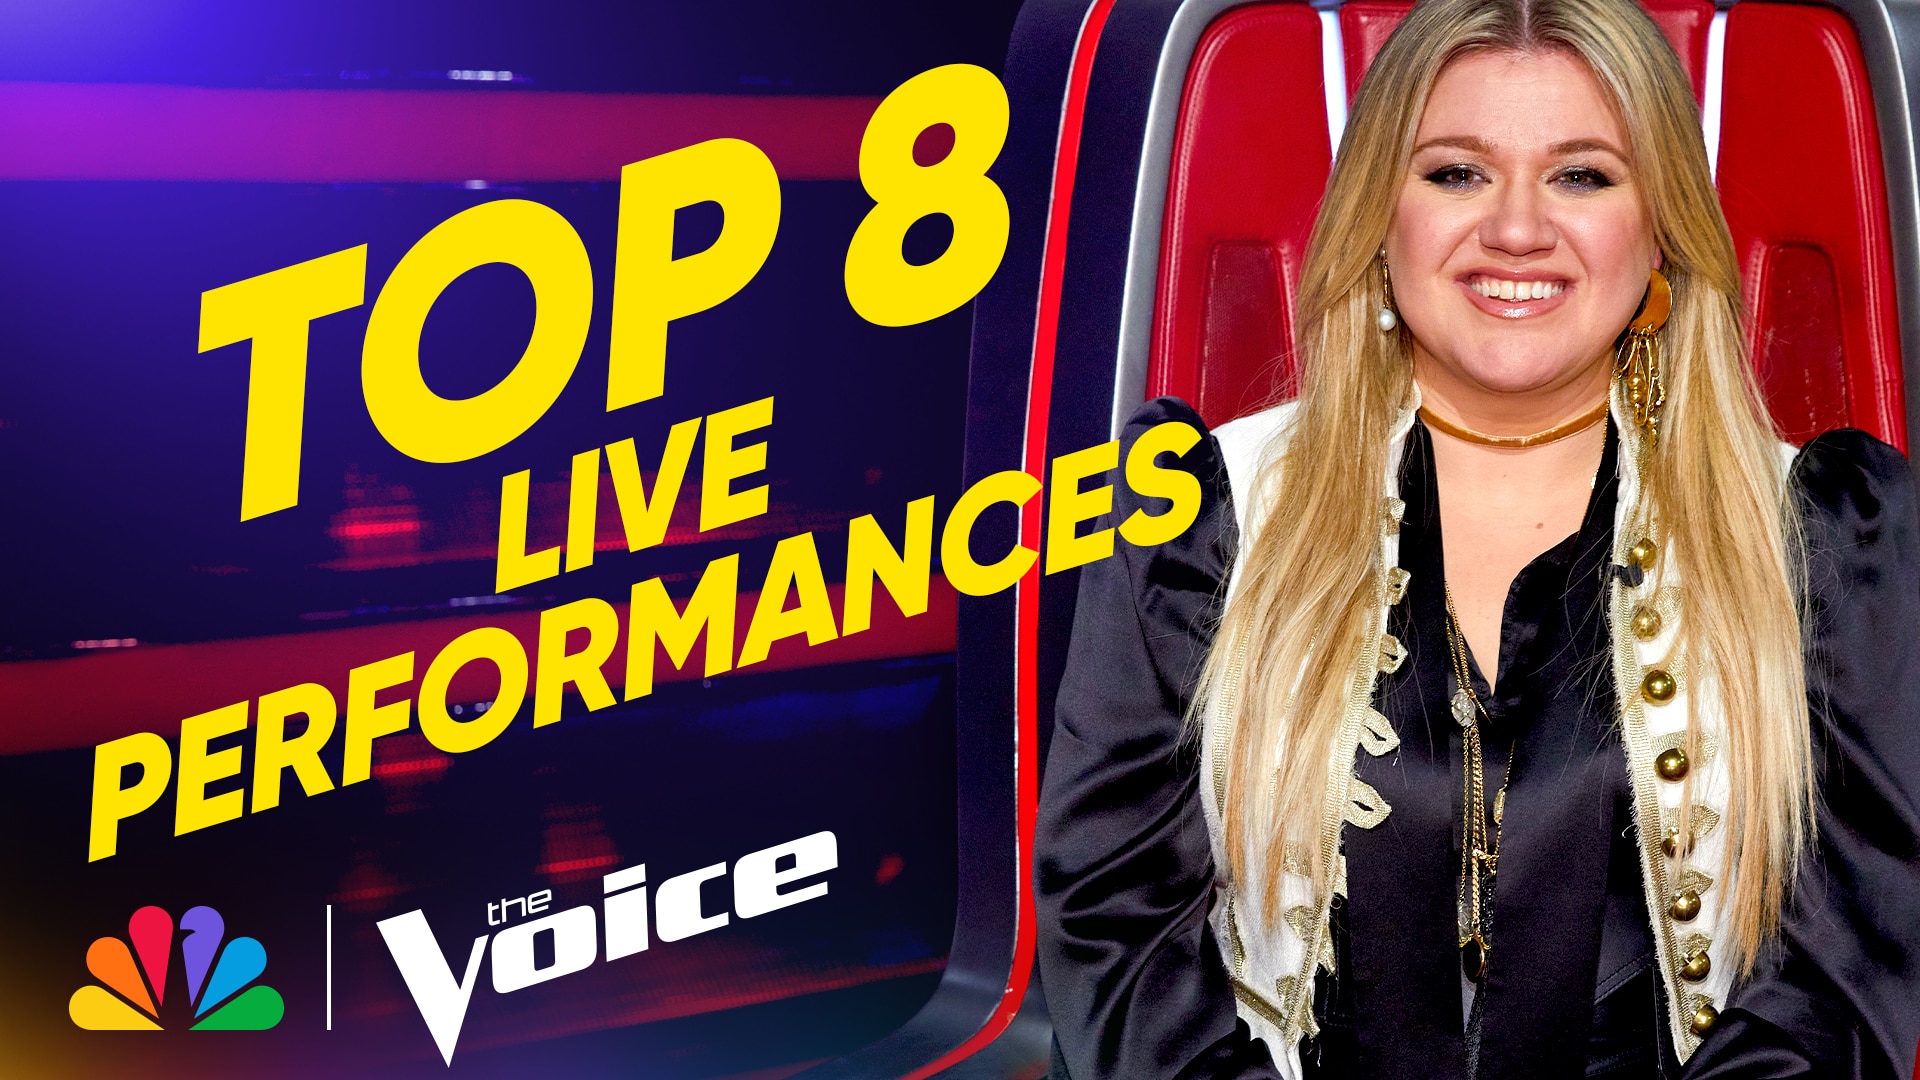 Watch The Voice Web Exclusive Incredible Live Performances from the